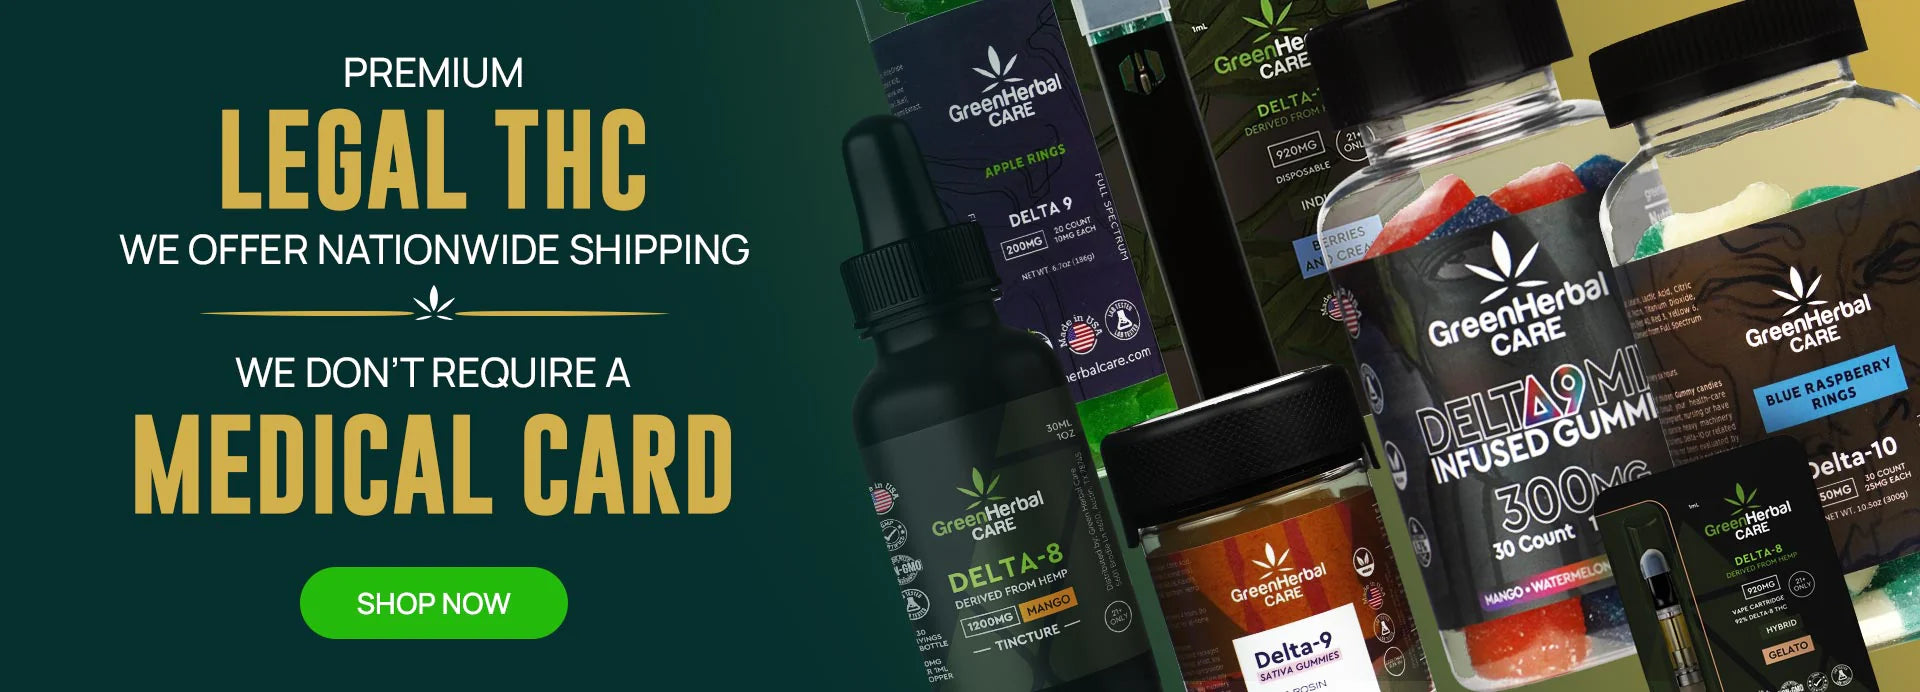 ghc thc products desktop banner